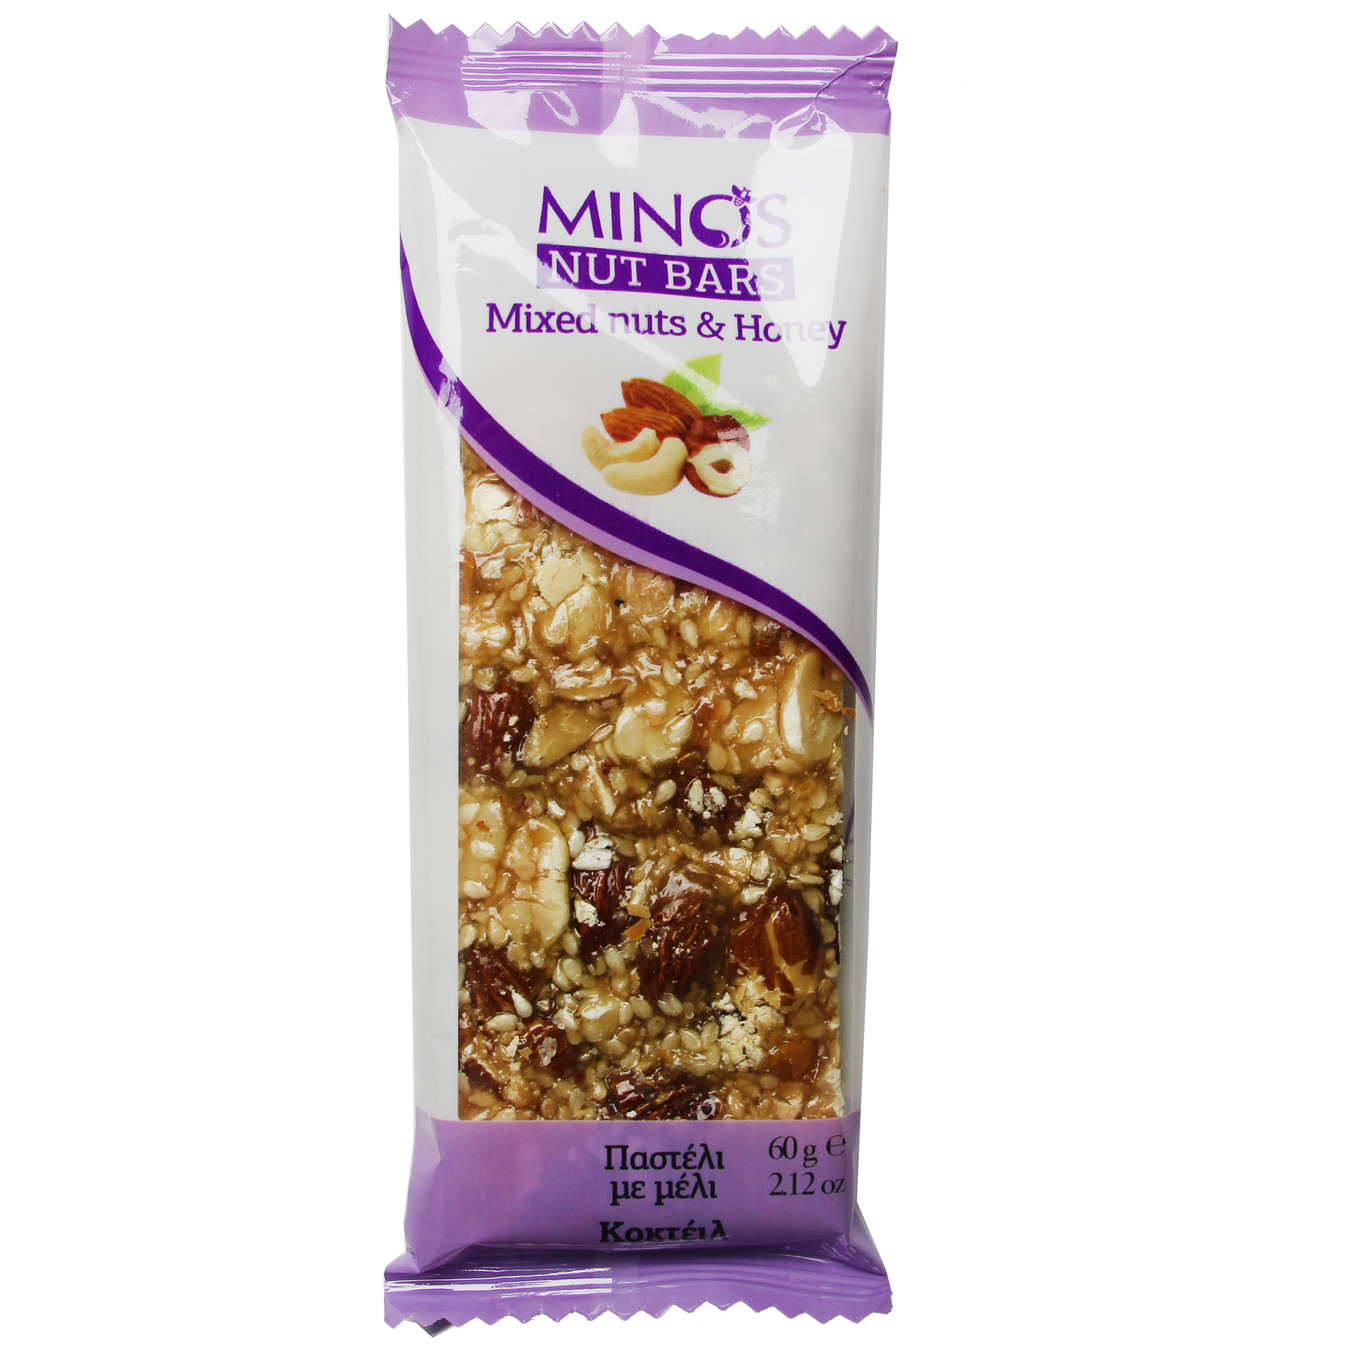 Minos With Mixed Nuts And Honey Bar 60g